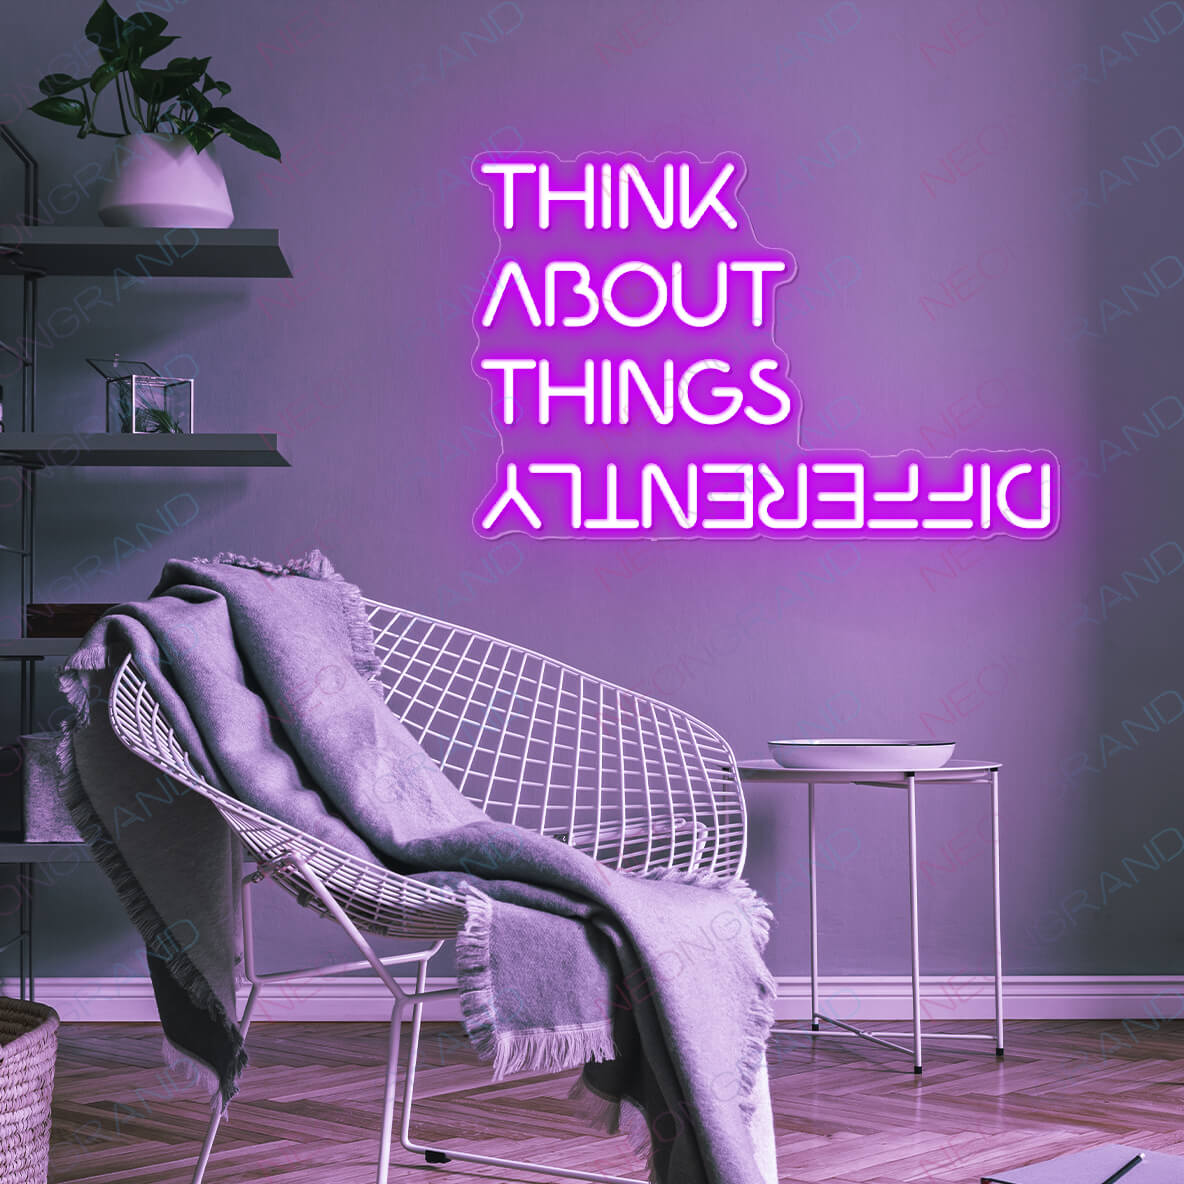 Think About Things Differently Neon Sign Led Light purple